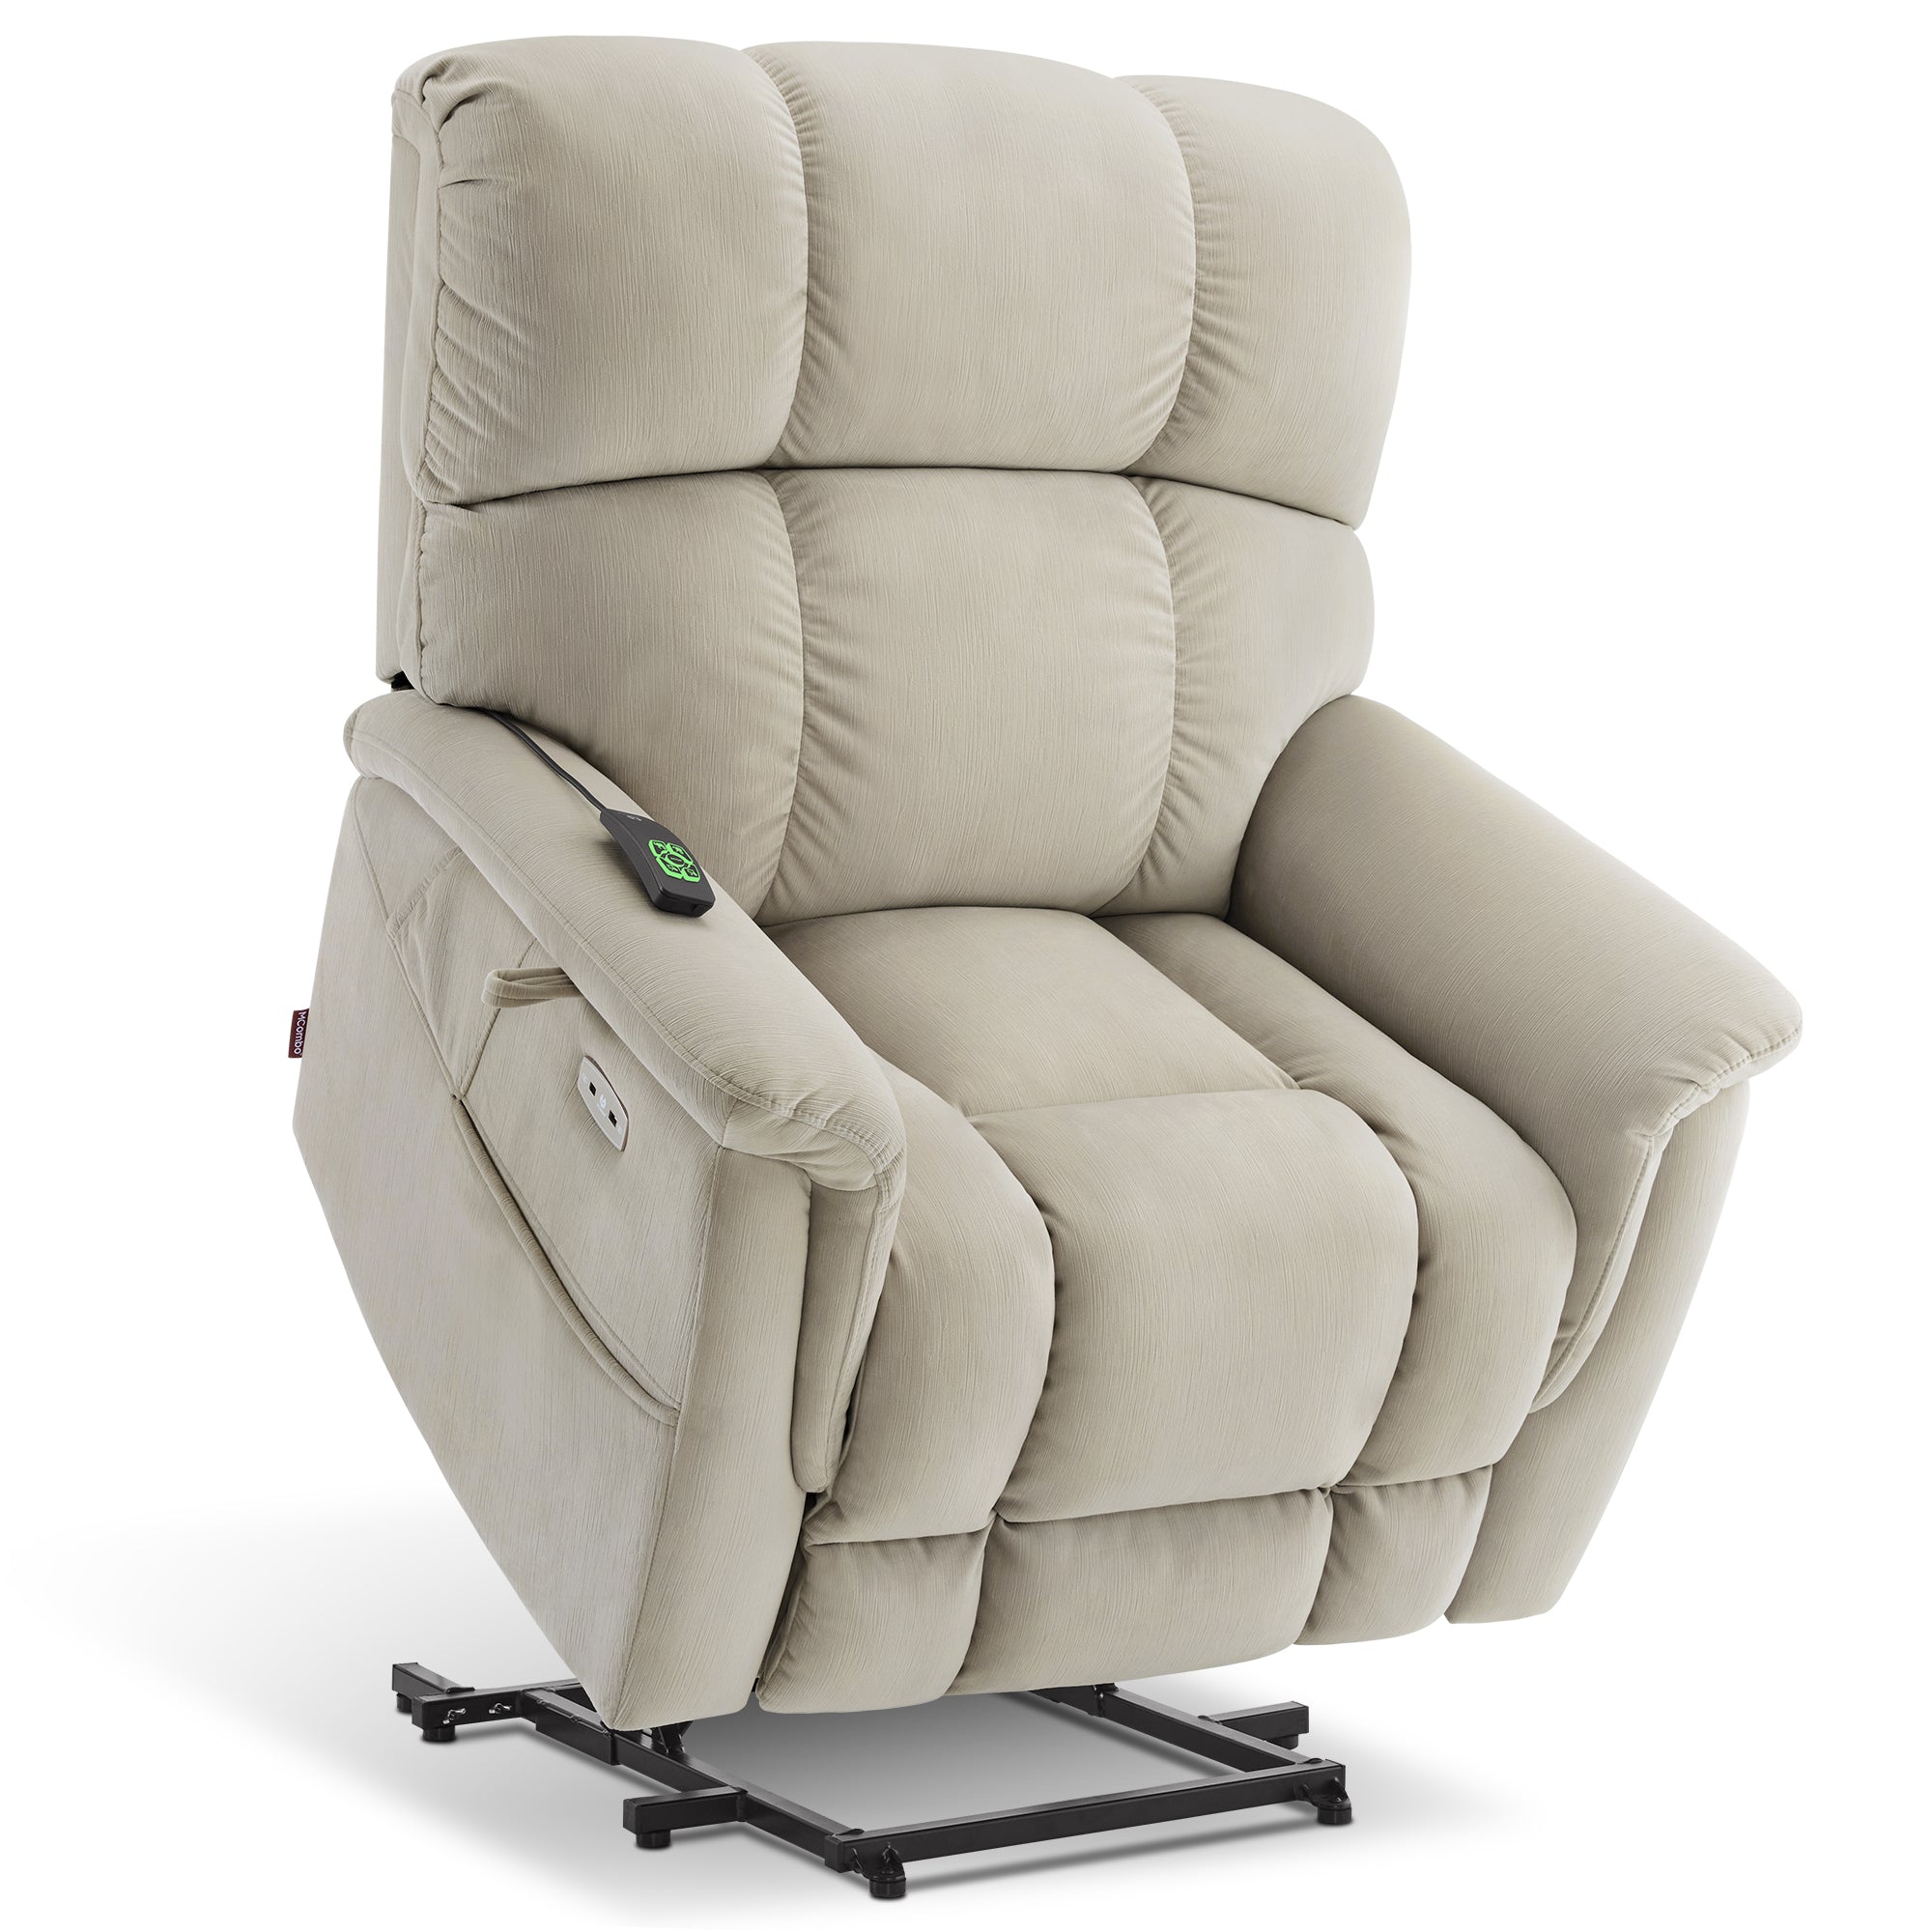 MCombo Dual Motor Power Lift Recliner Chair Sofa with Massage and Dual Heating for Elderly People, Infinite Position, USB Ports, Fabric R7166